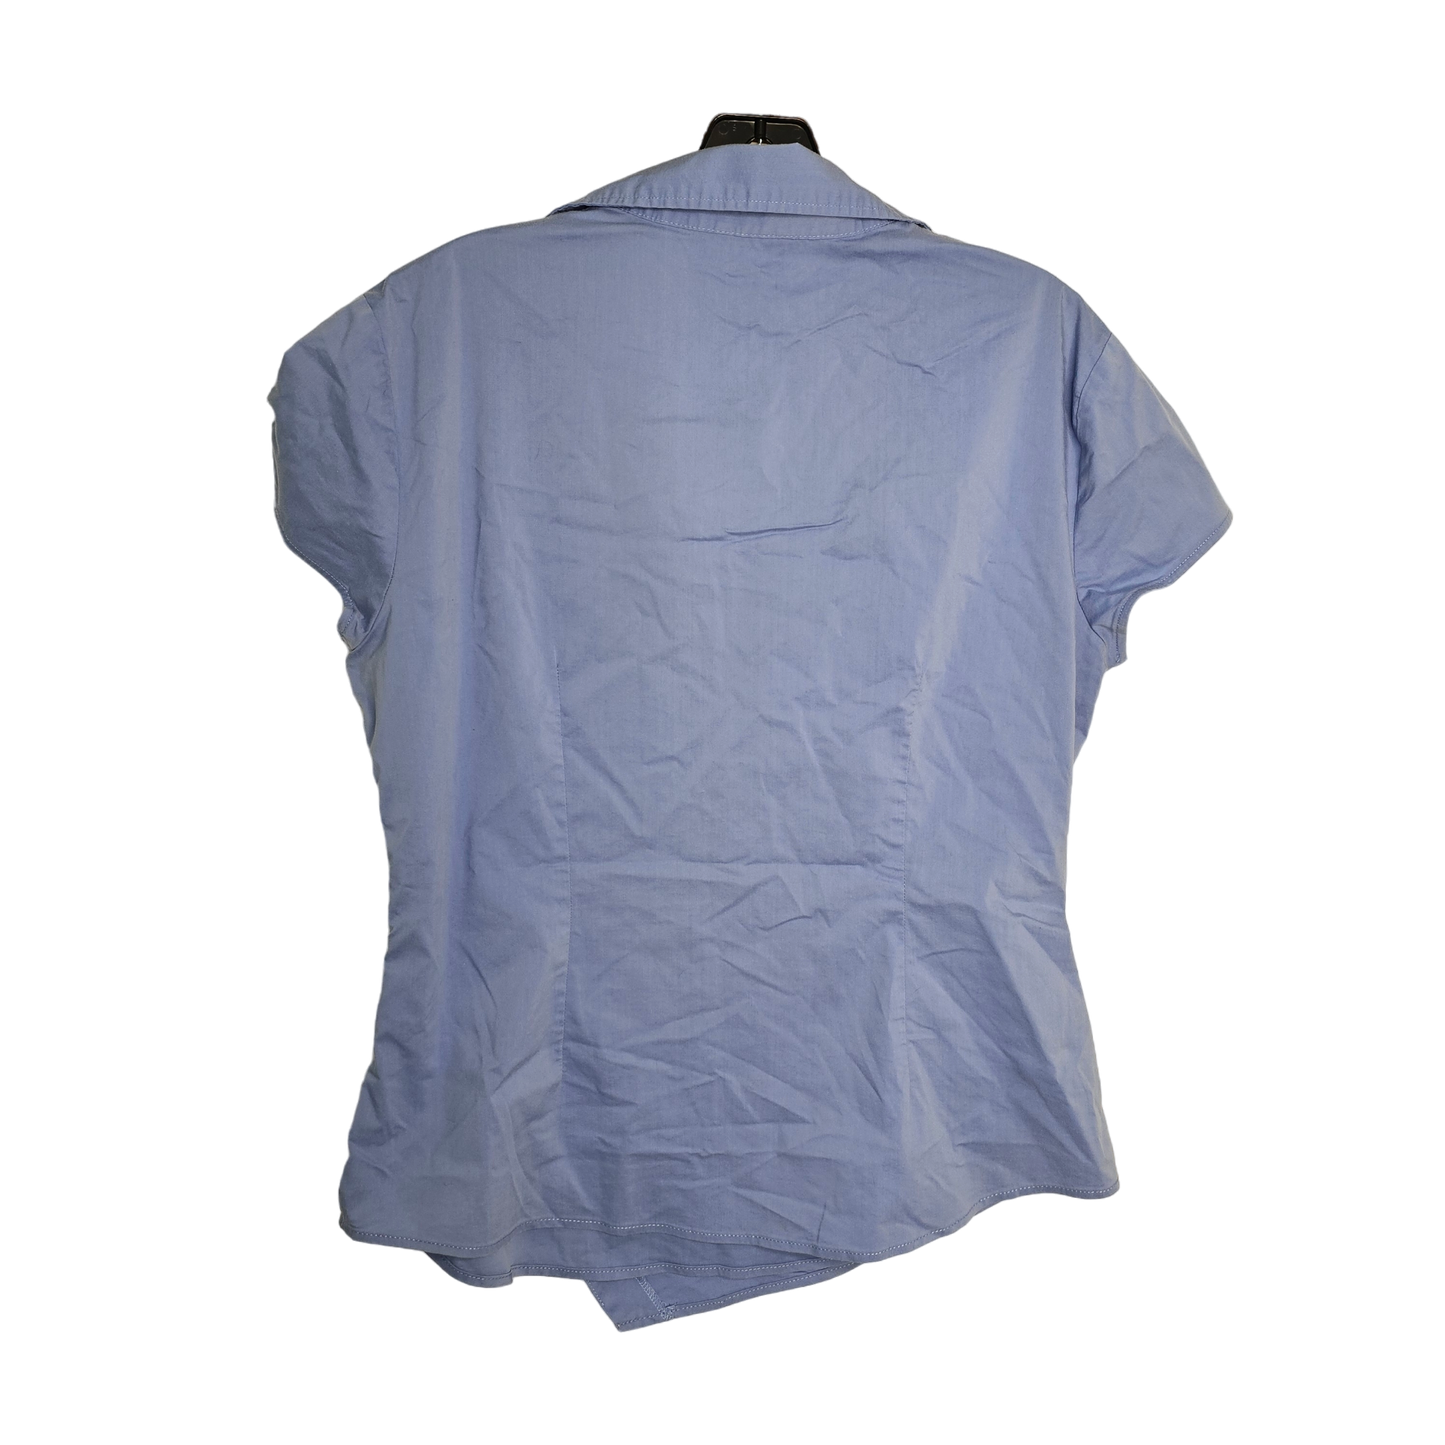 Top Short Sleeve By New York And Co  Size: L